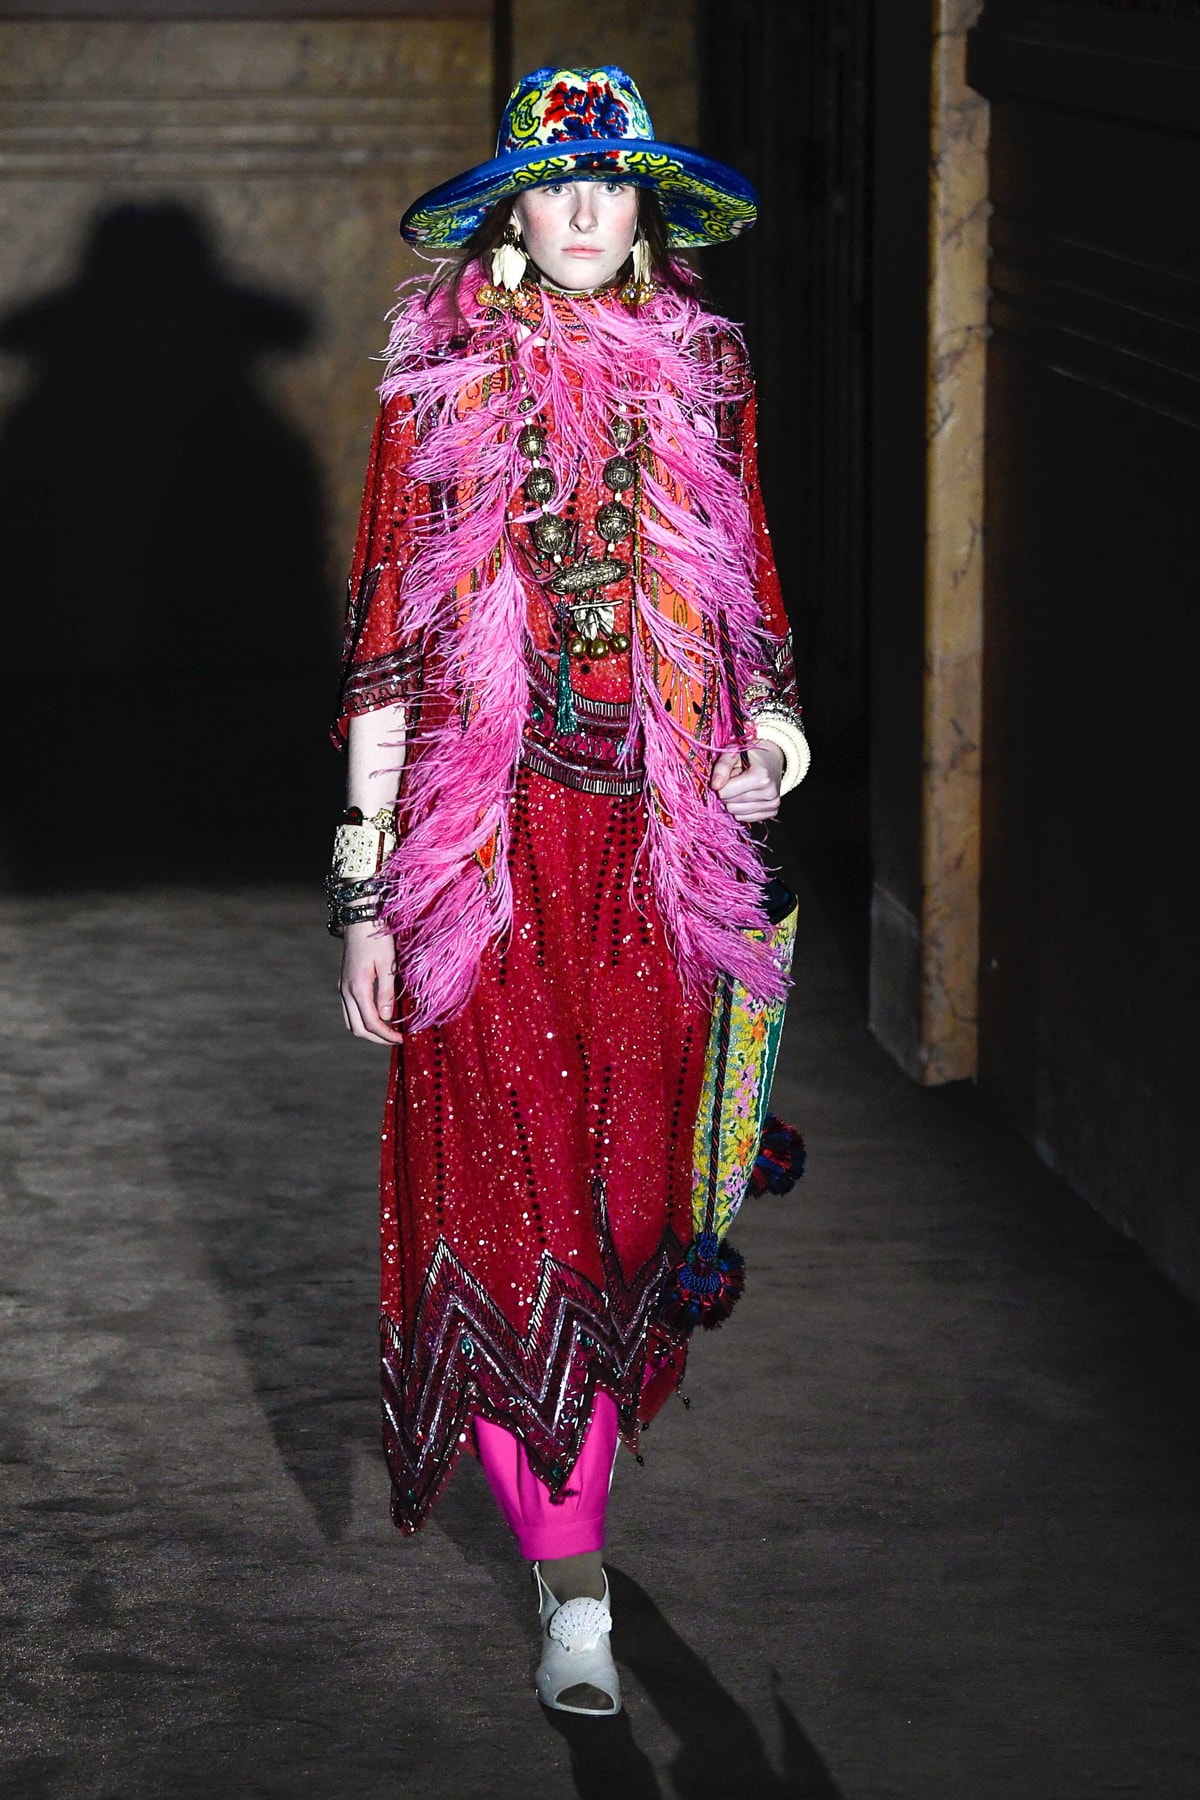 Gucci Alessandro Michelle Spring Summer 2019 Paris Fashion Week Show Collection Dress Red Pink Hat Blue